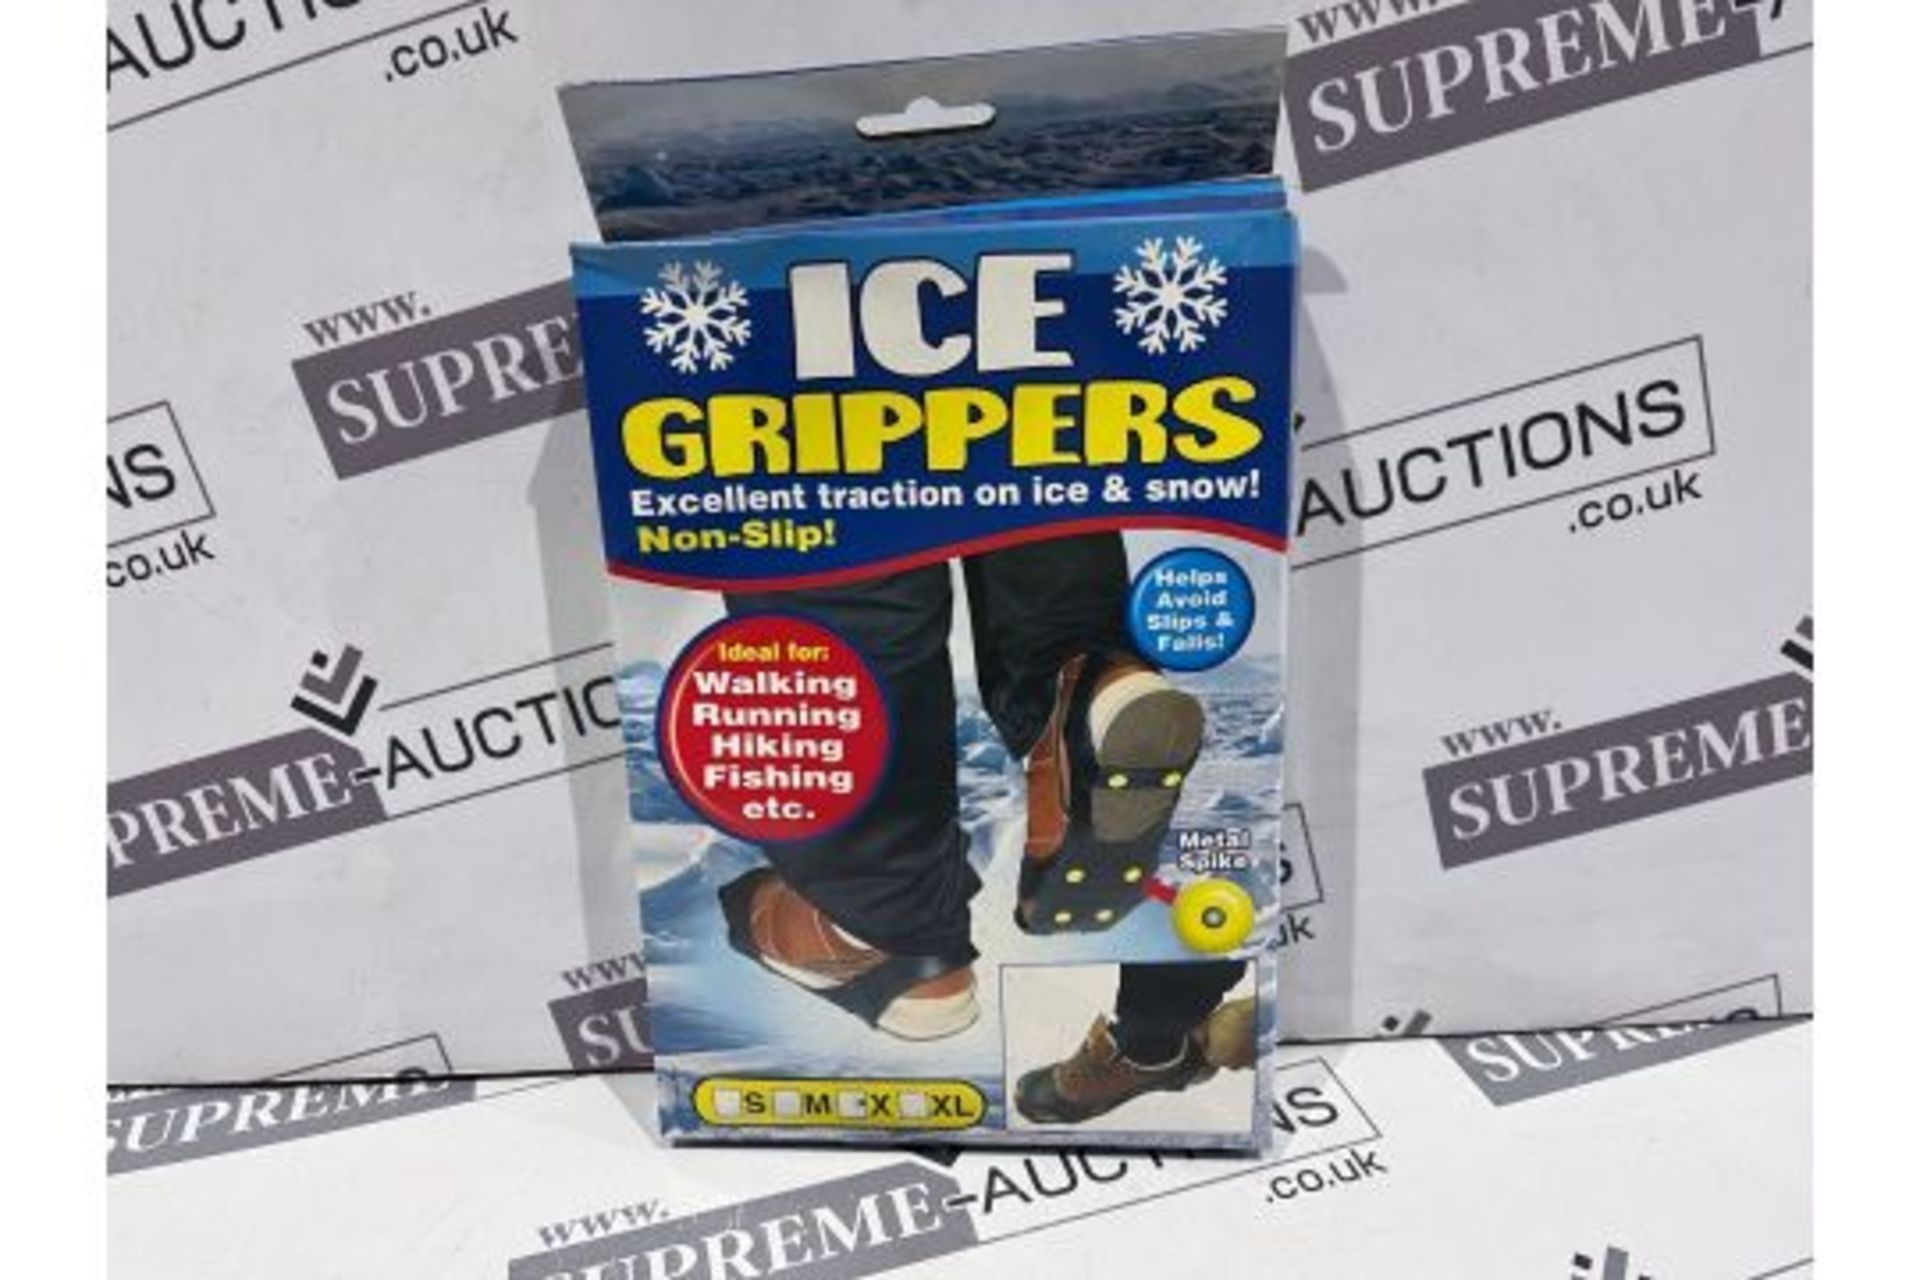 72 X BRAND NEW NON SLIP ICE GRIPPERS PERFECT FOR THE WINTER WEATHER, WALKERS/HIKERS ETC. RRP £14.